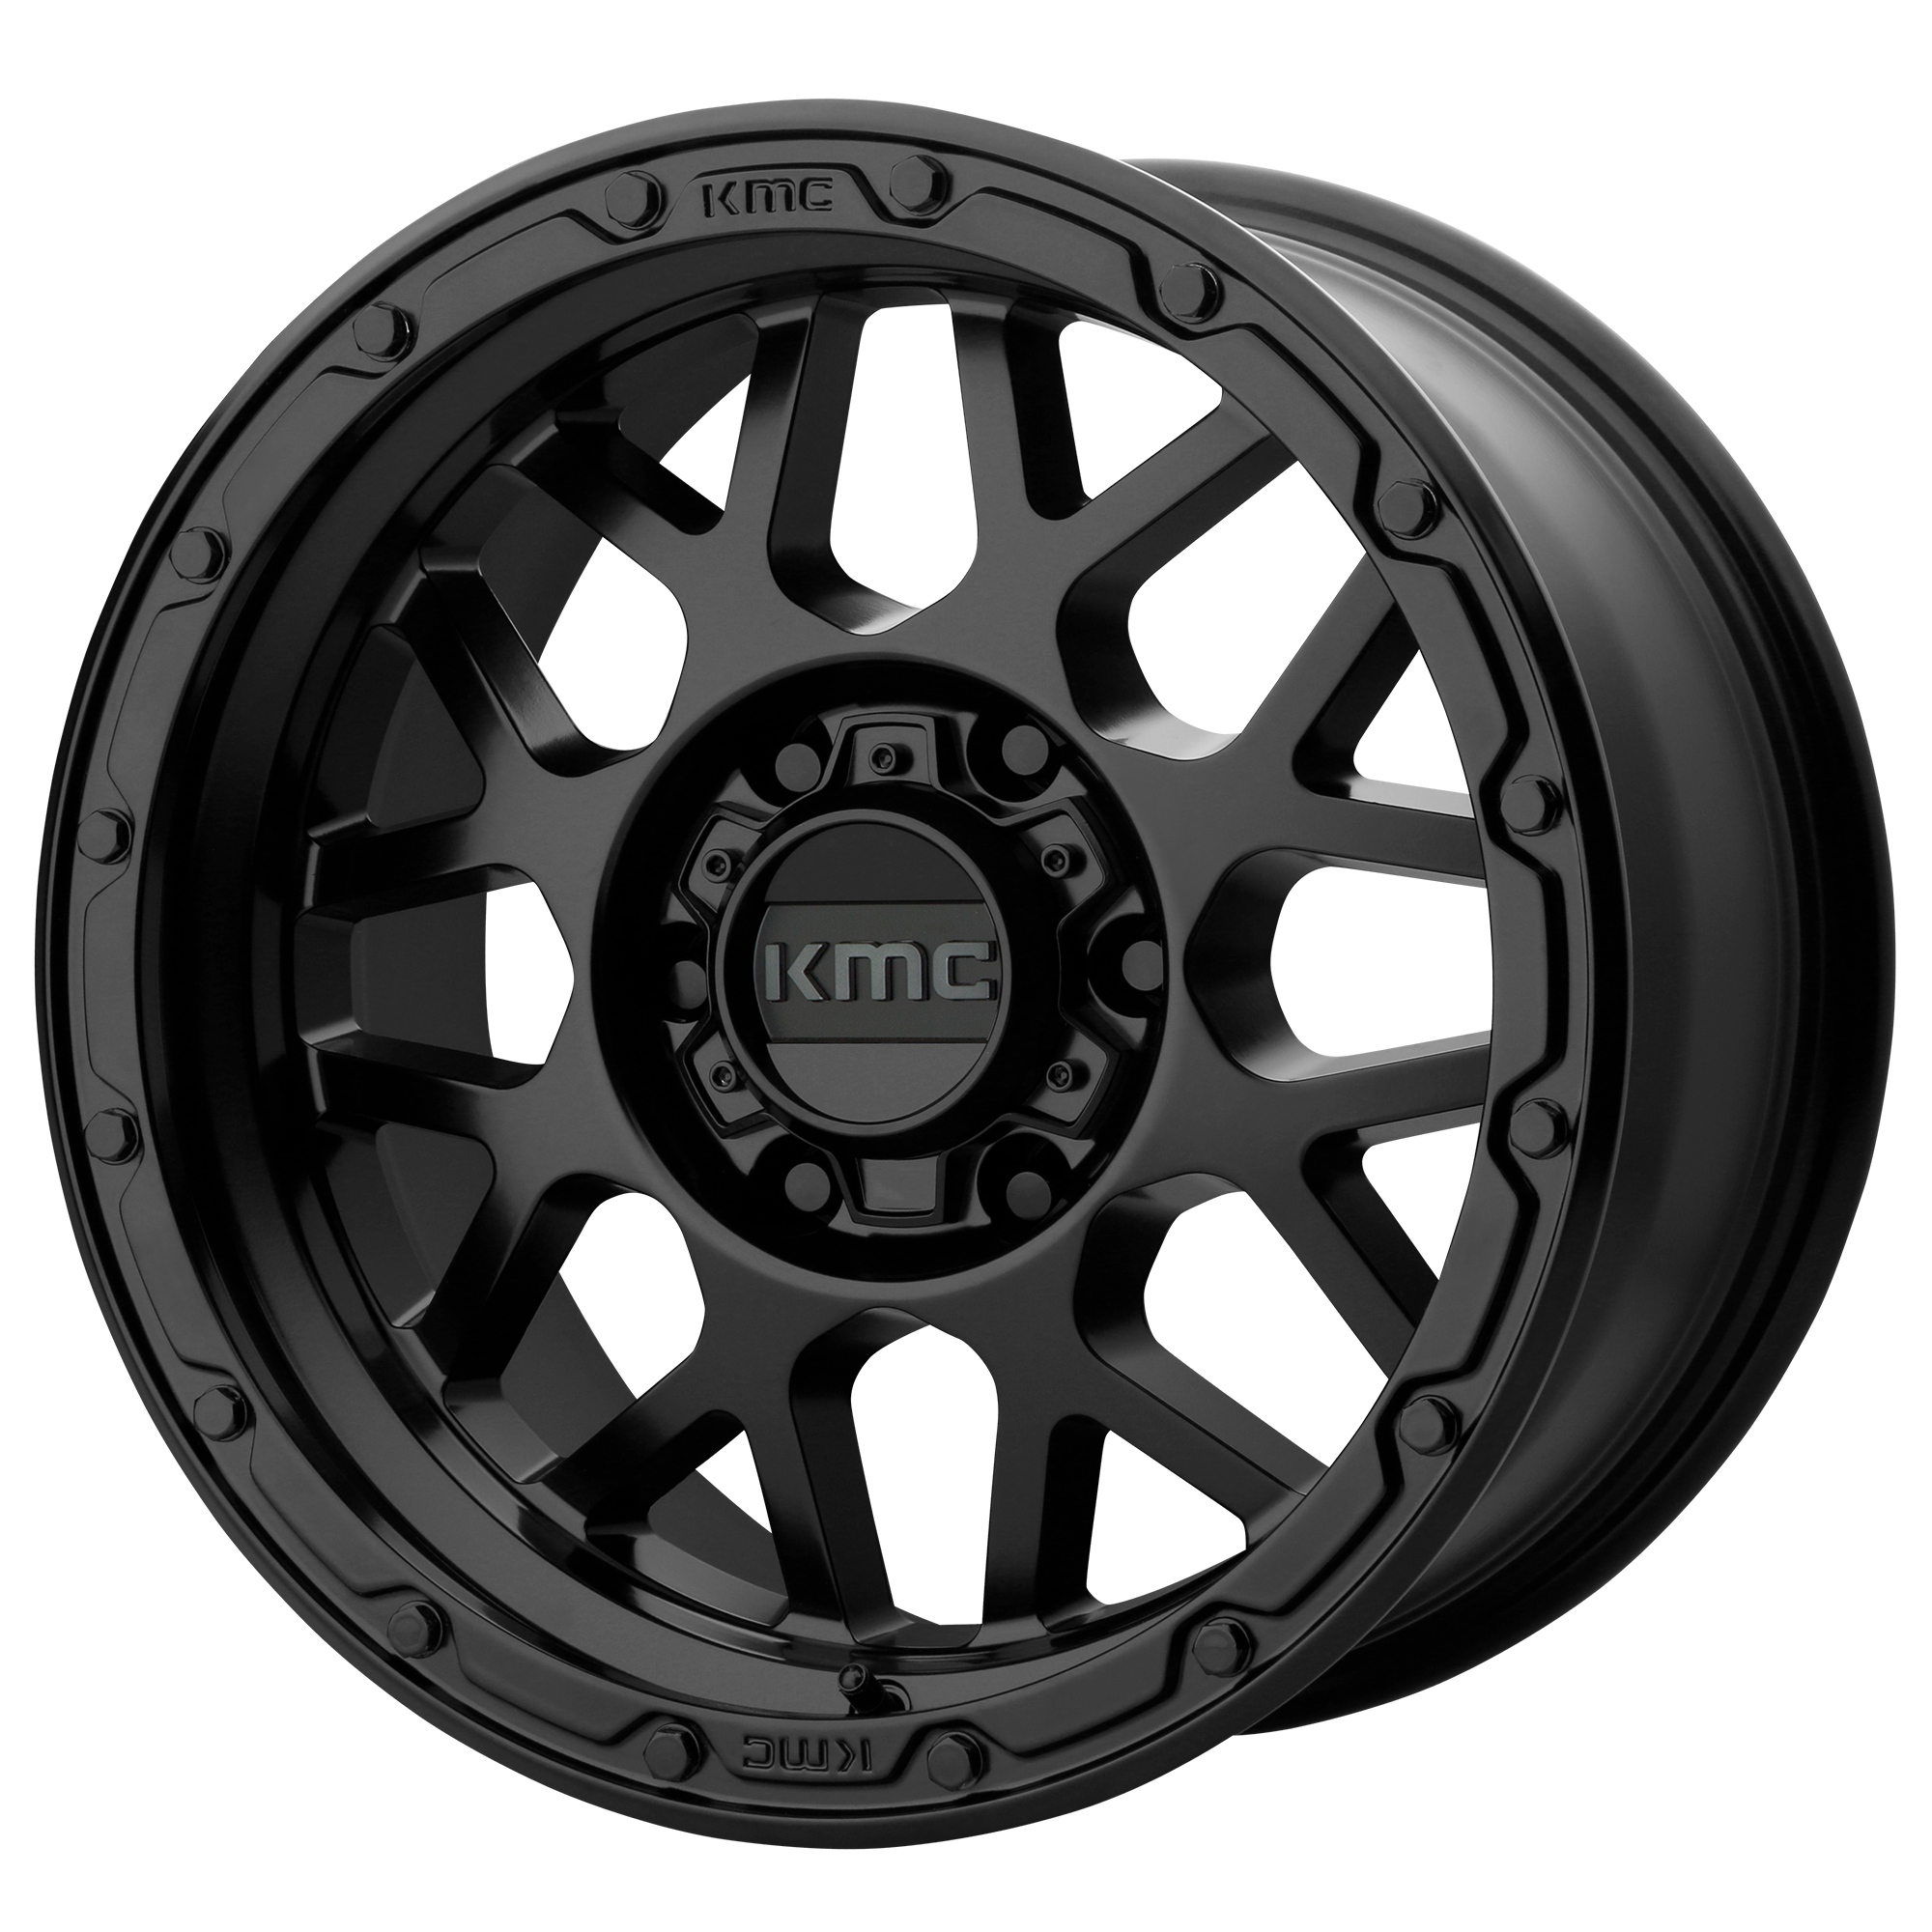 GRENADE OFF-ROAD 20x9 6x135.00 MATTE BLACK (18 mm) - Tires and Engine Performance